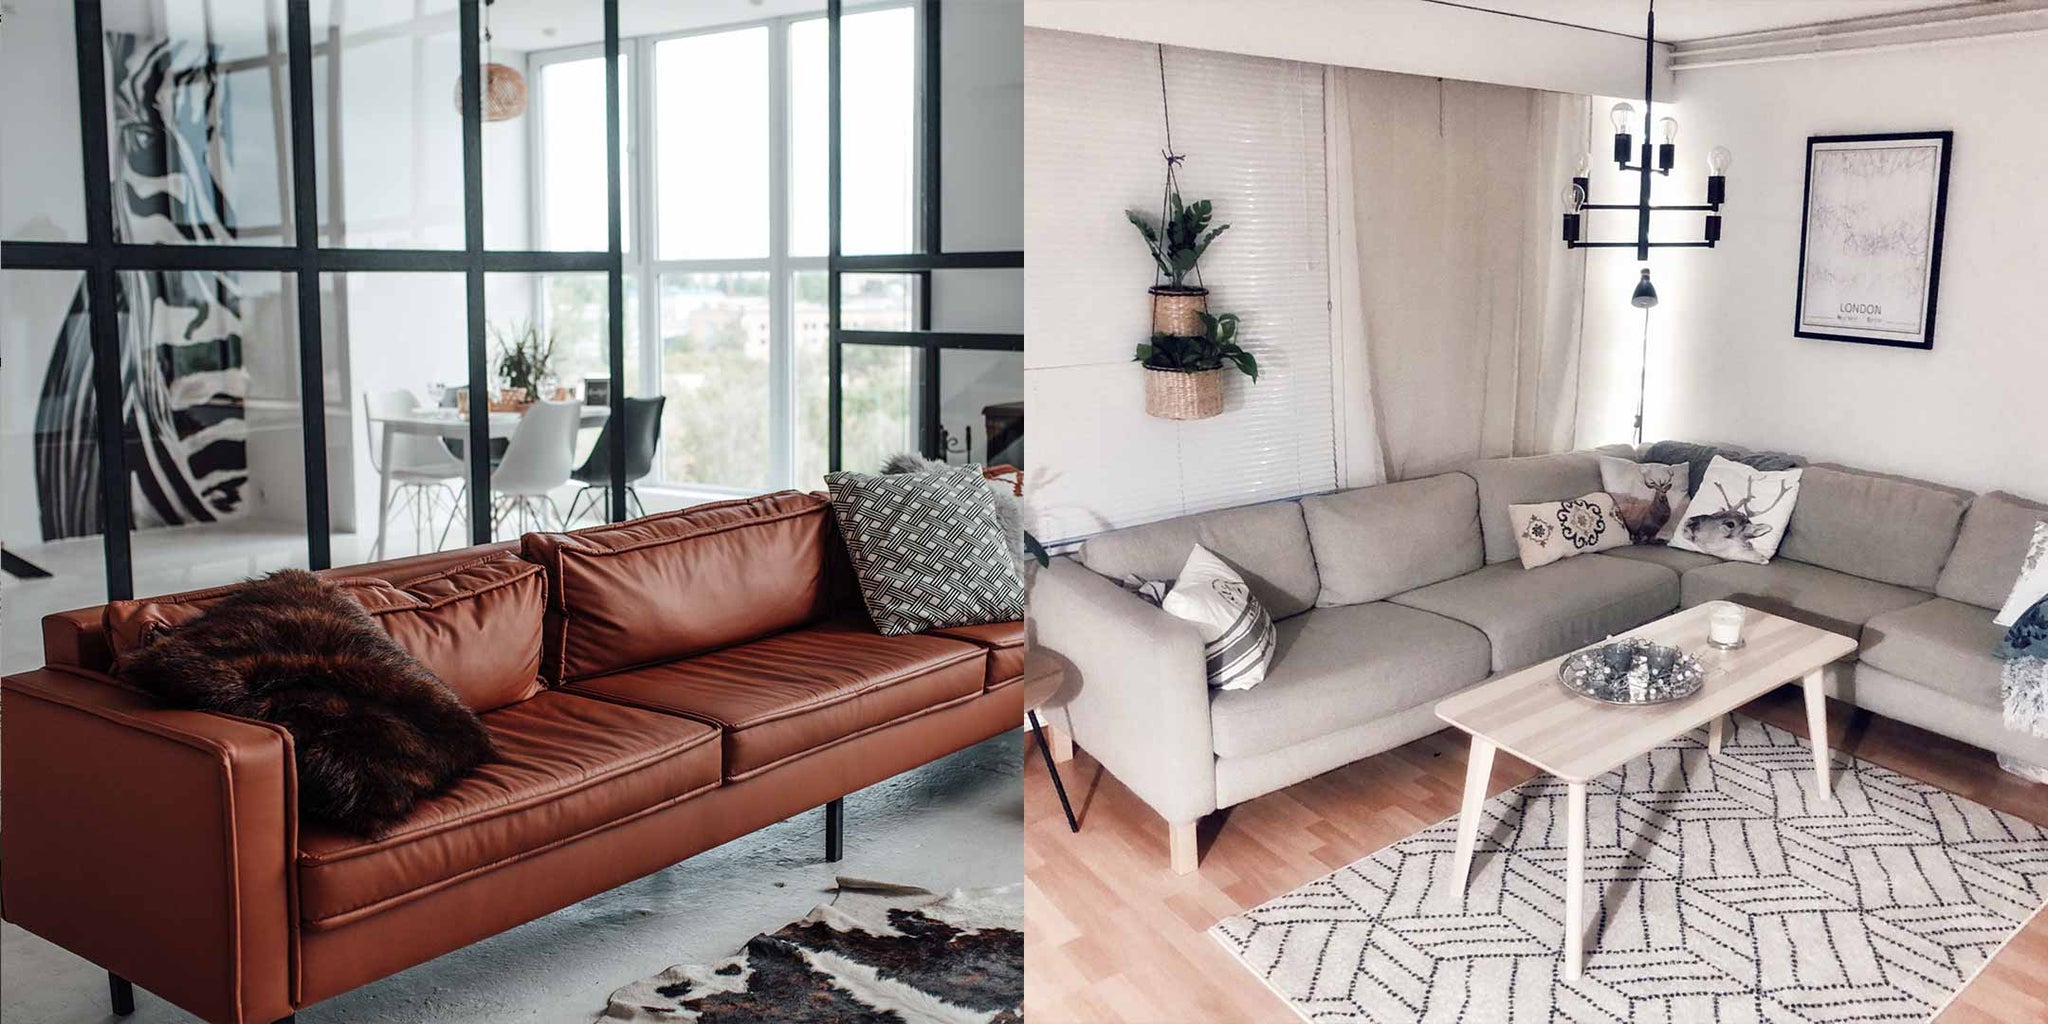 Leather Versus Fabric Sofa: Which One Is Better? – Megafurniture